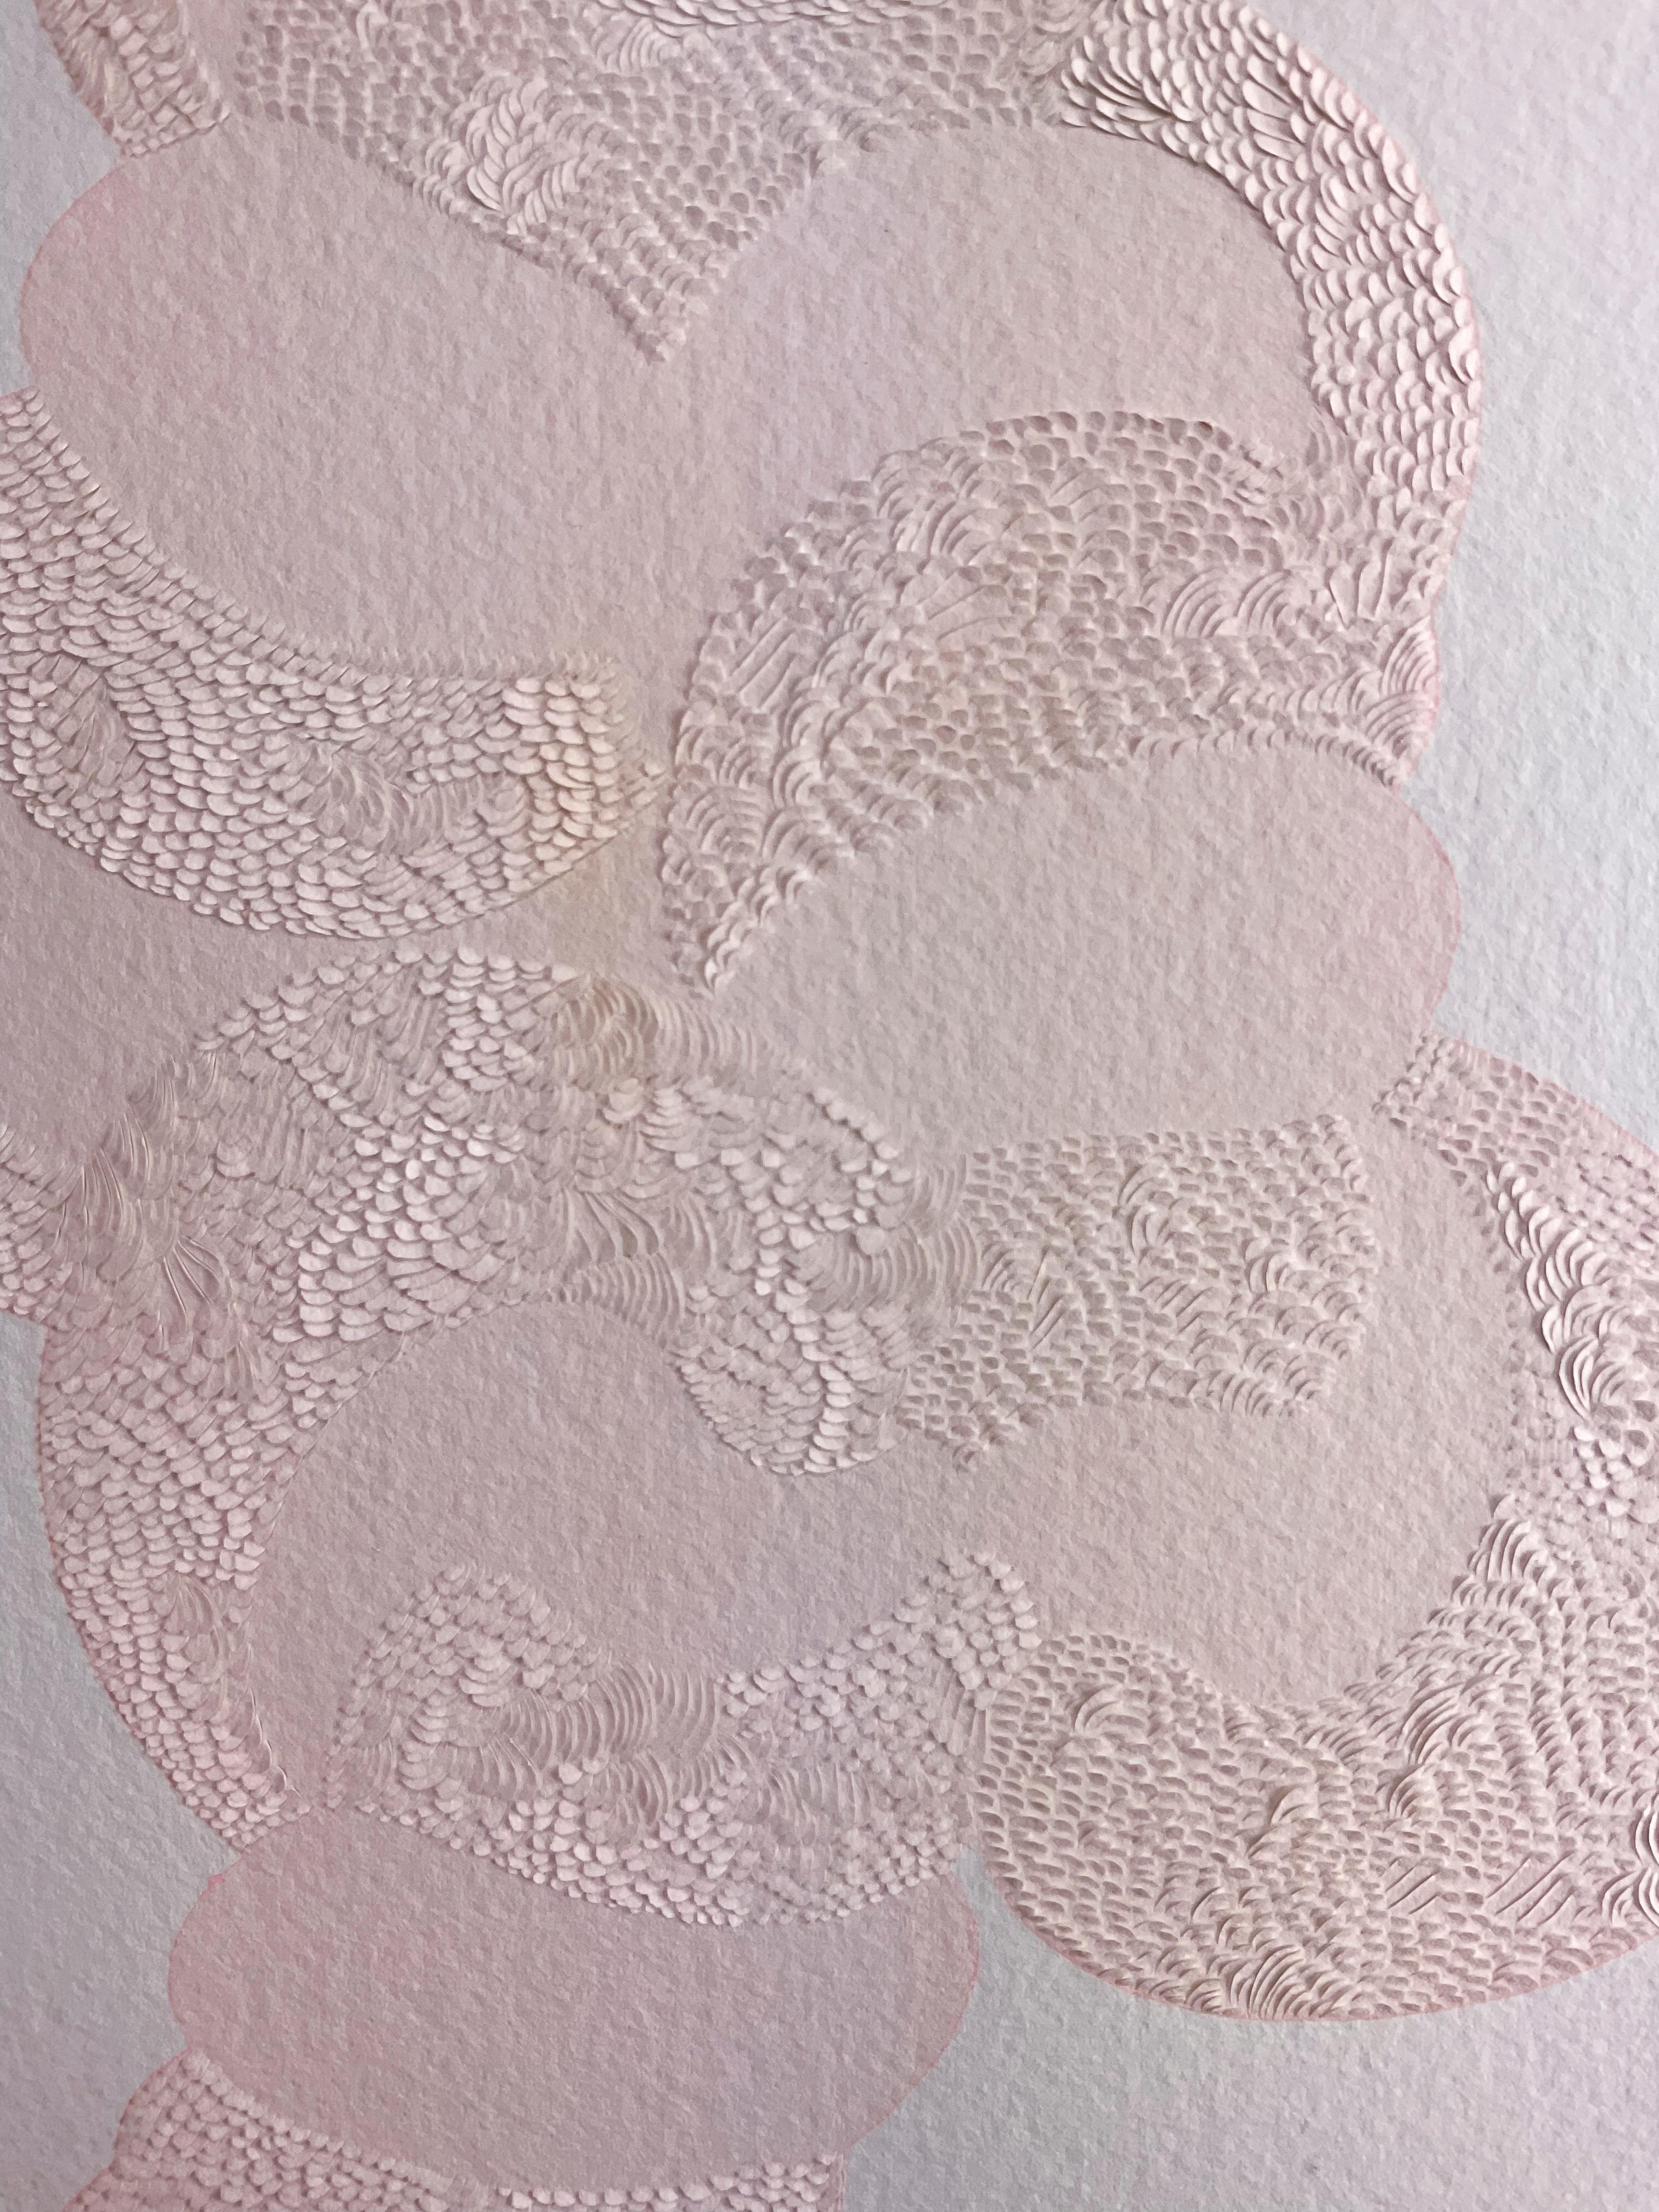 Knife Drawing III - Manipulated Textured Paper with Stunning Detail (Pink) - Gray Abstract Drawing by Lucha Rodriguez